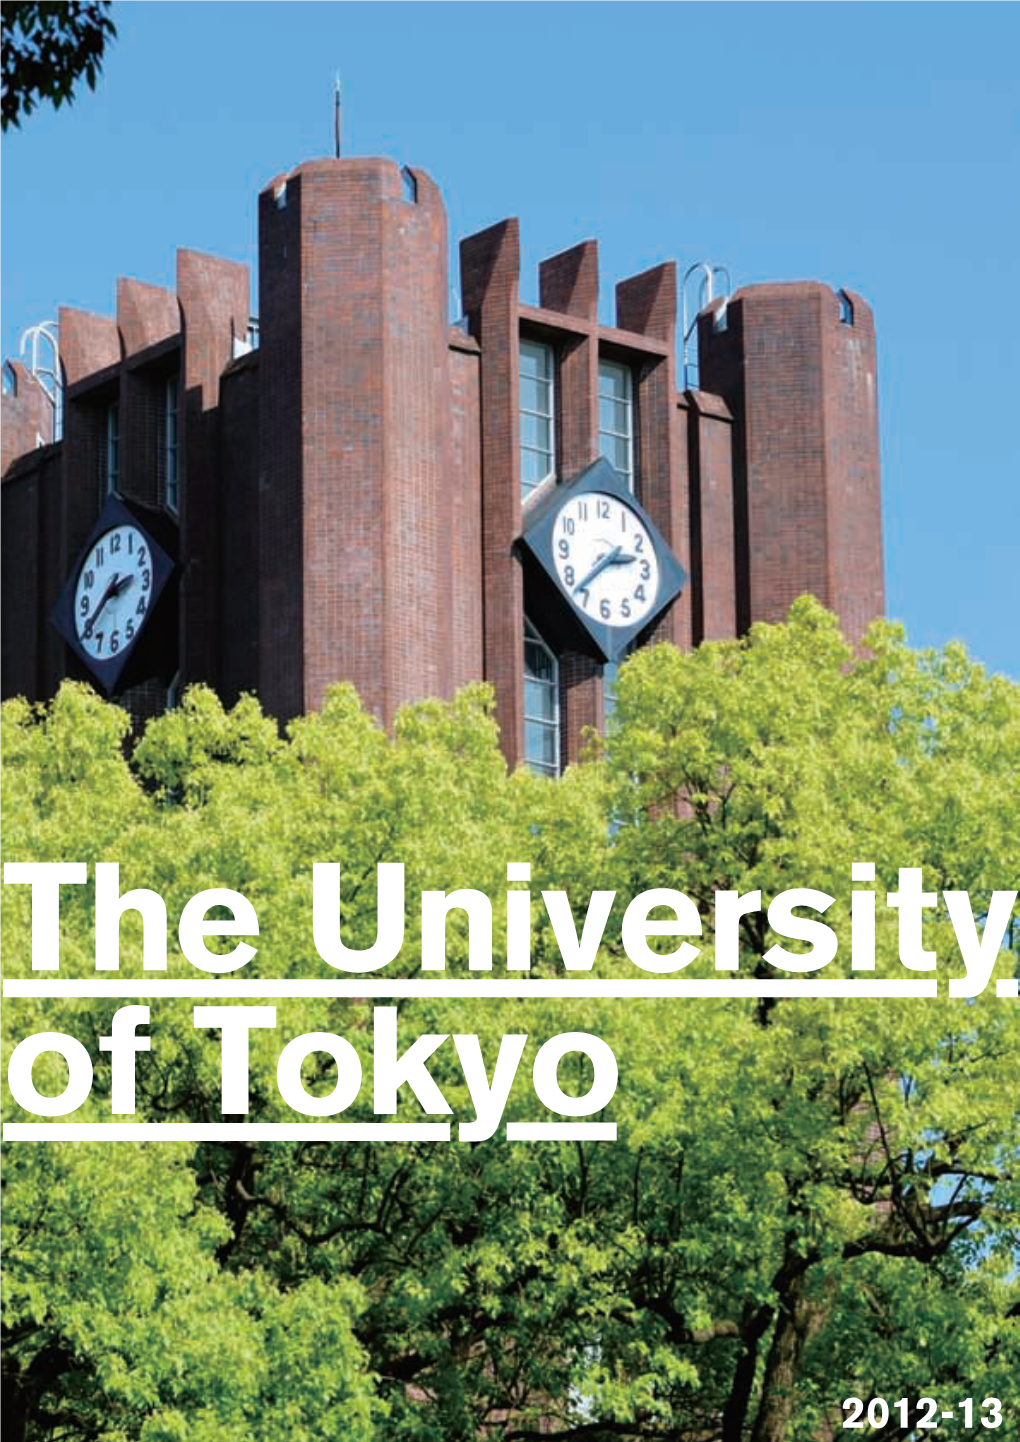 The University of Tokyo 2012-13 Is More Familiarly Known Contents by Its Shortened Name of “Todai” in Japan